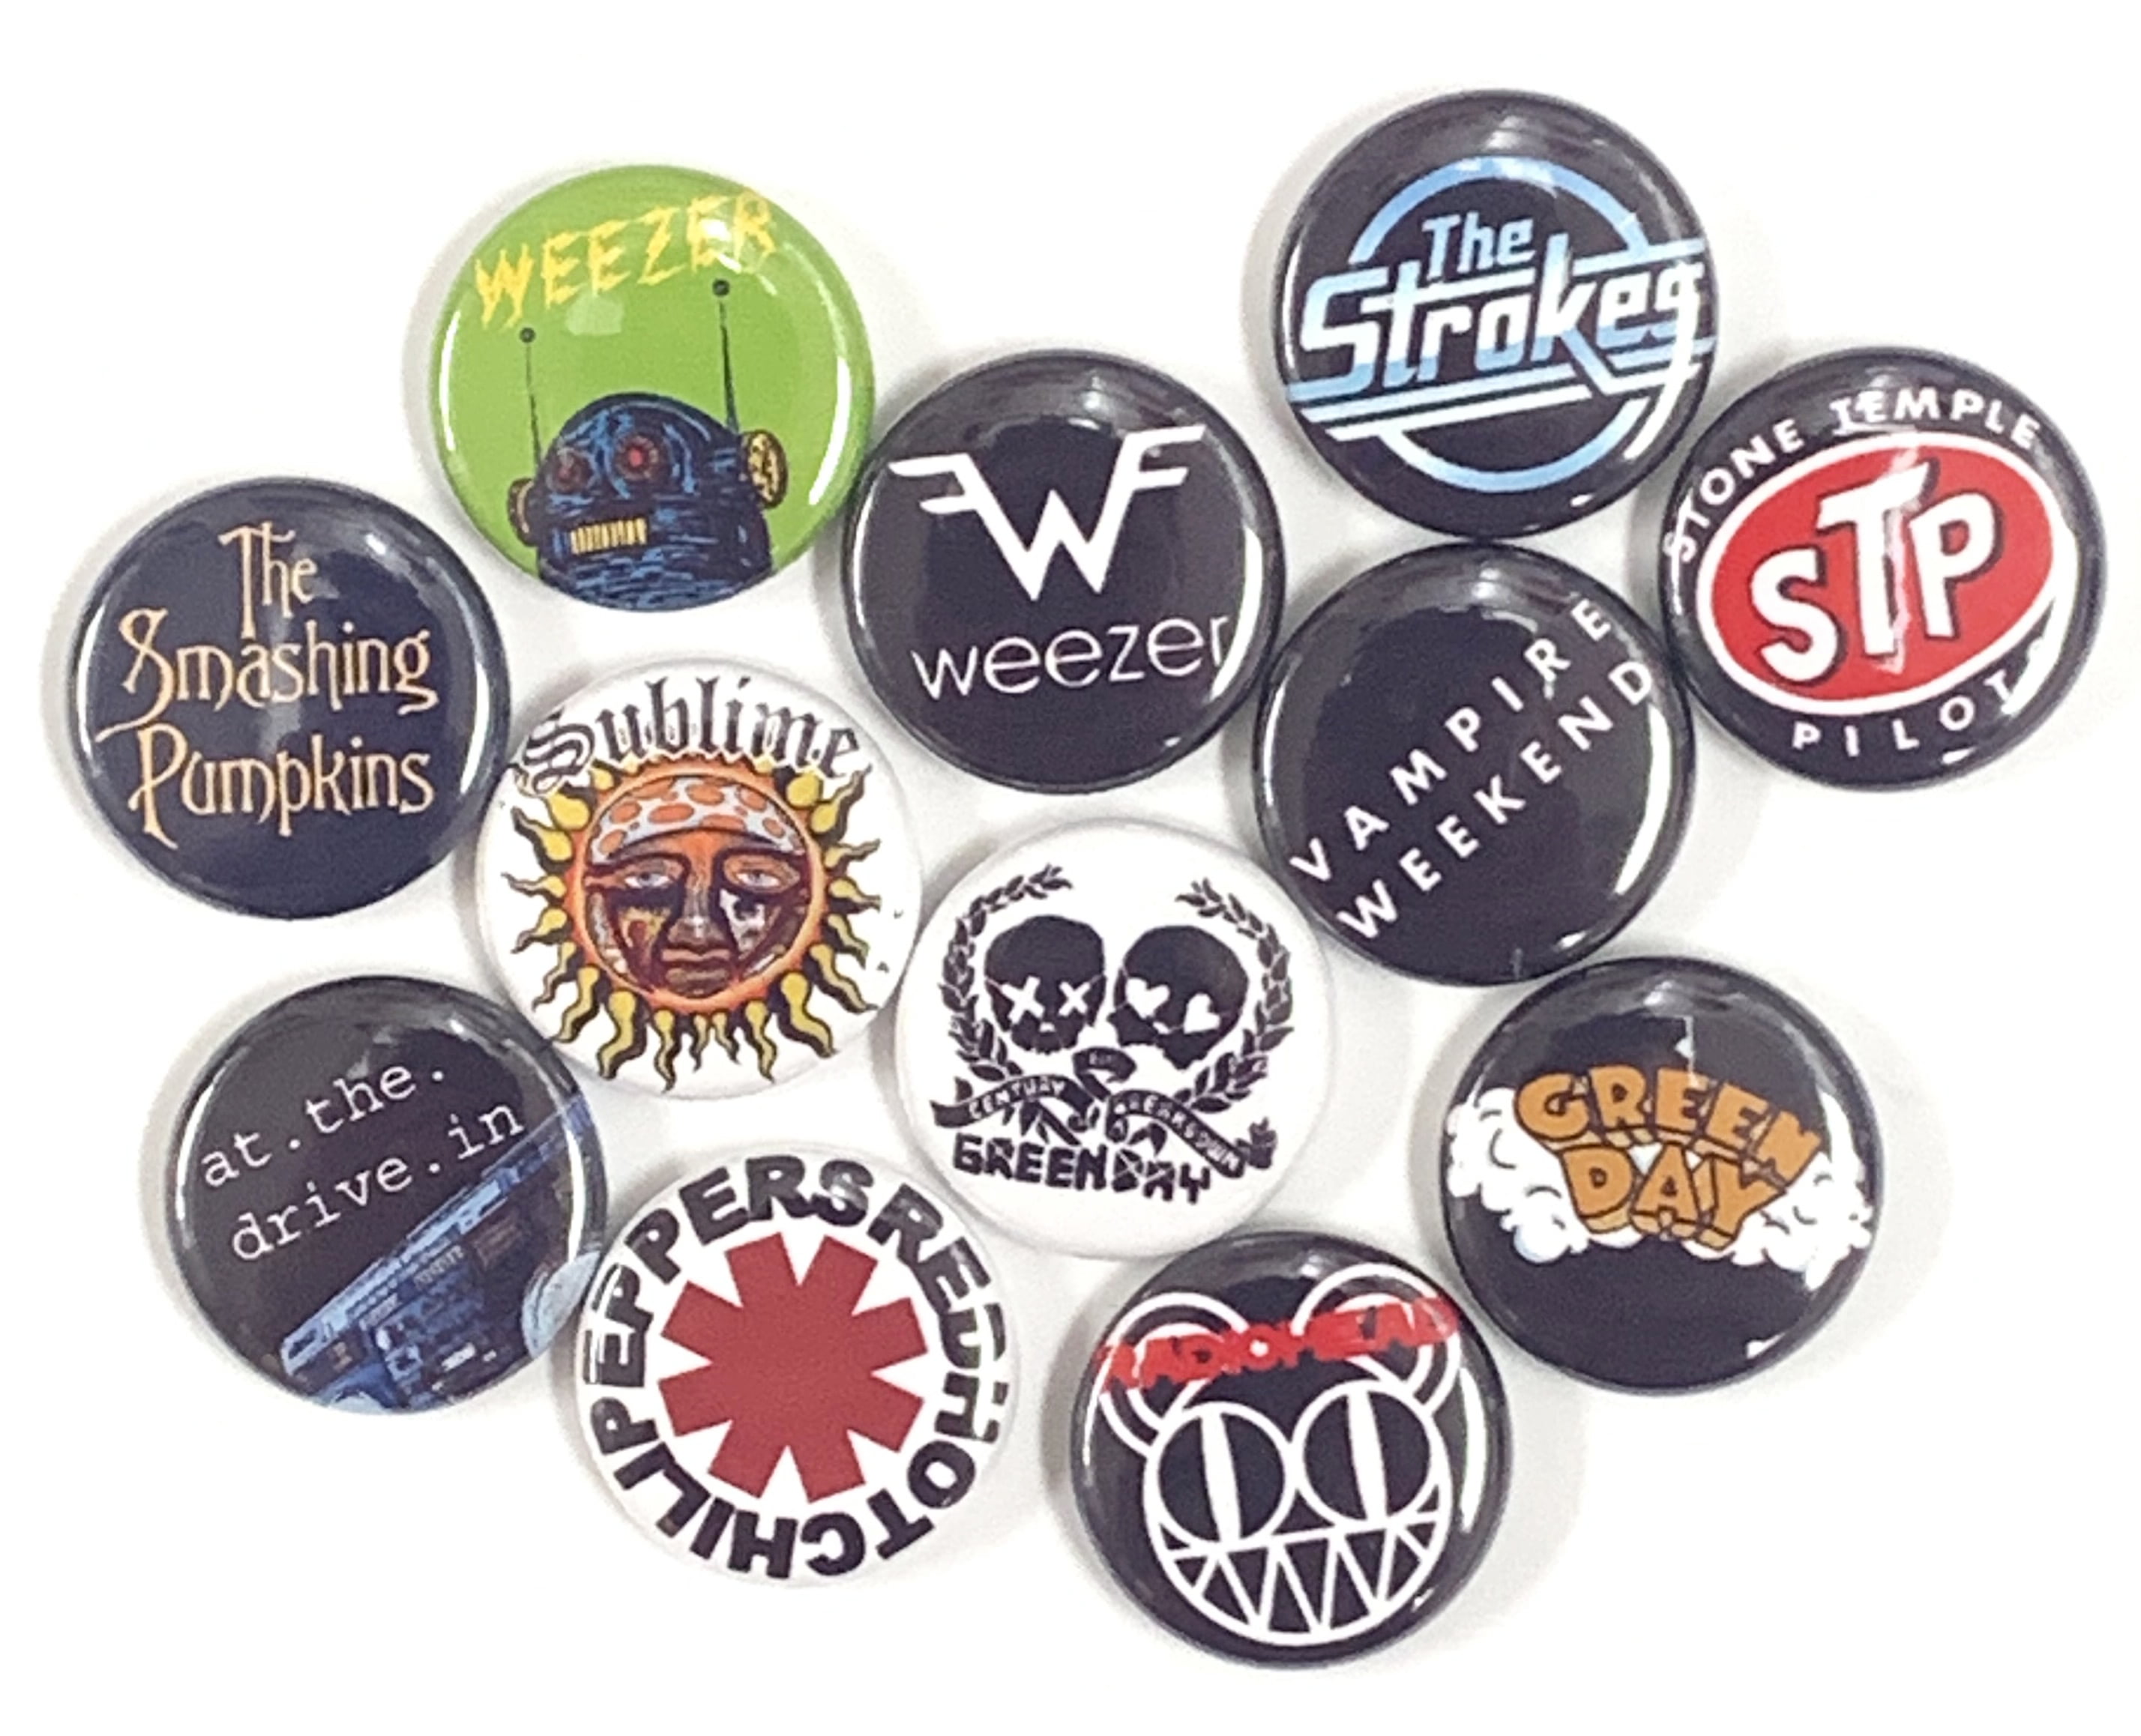 12 ROLLING STONES Lips Buttons Pinbacks 1" Pins One Inch Badges Rock Music Band